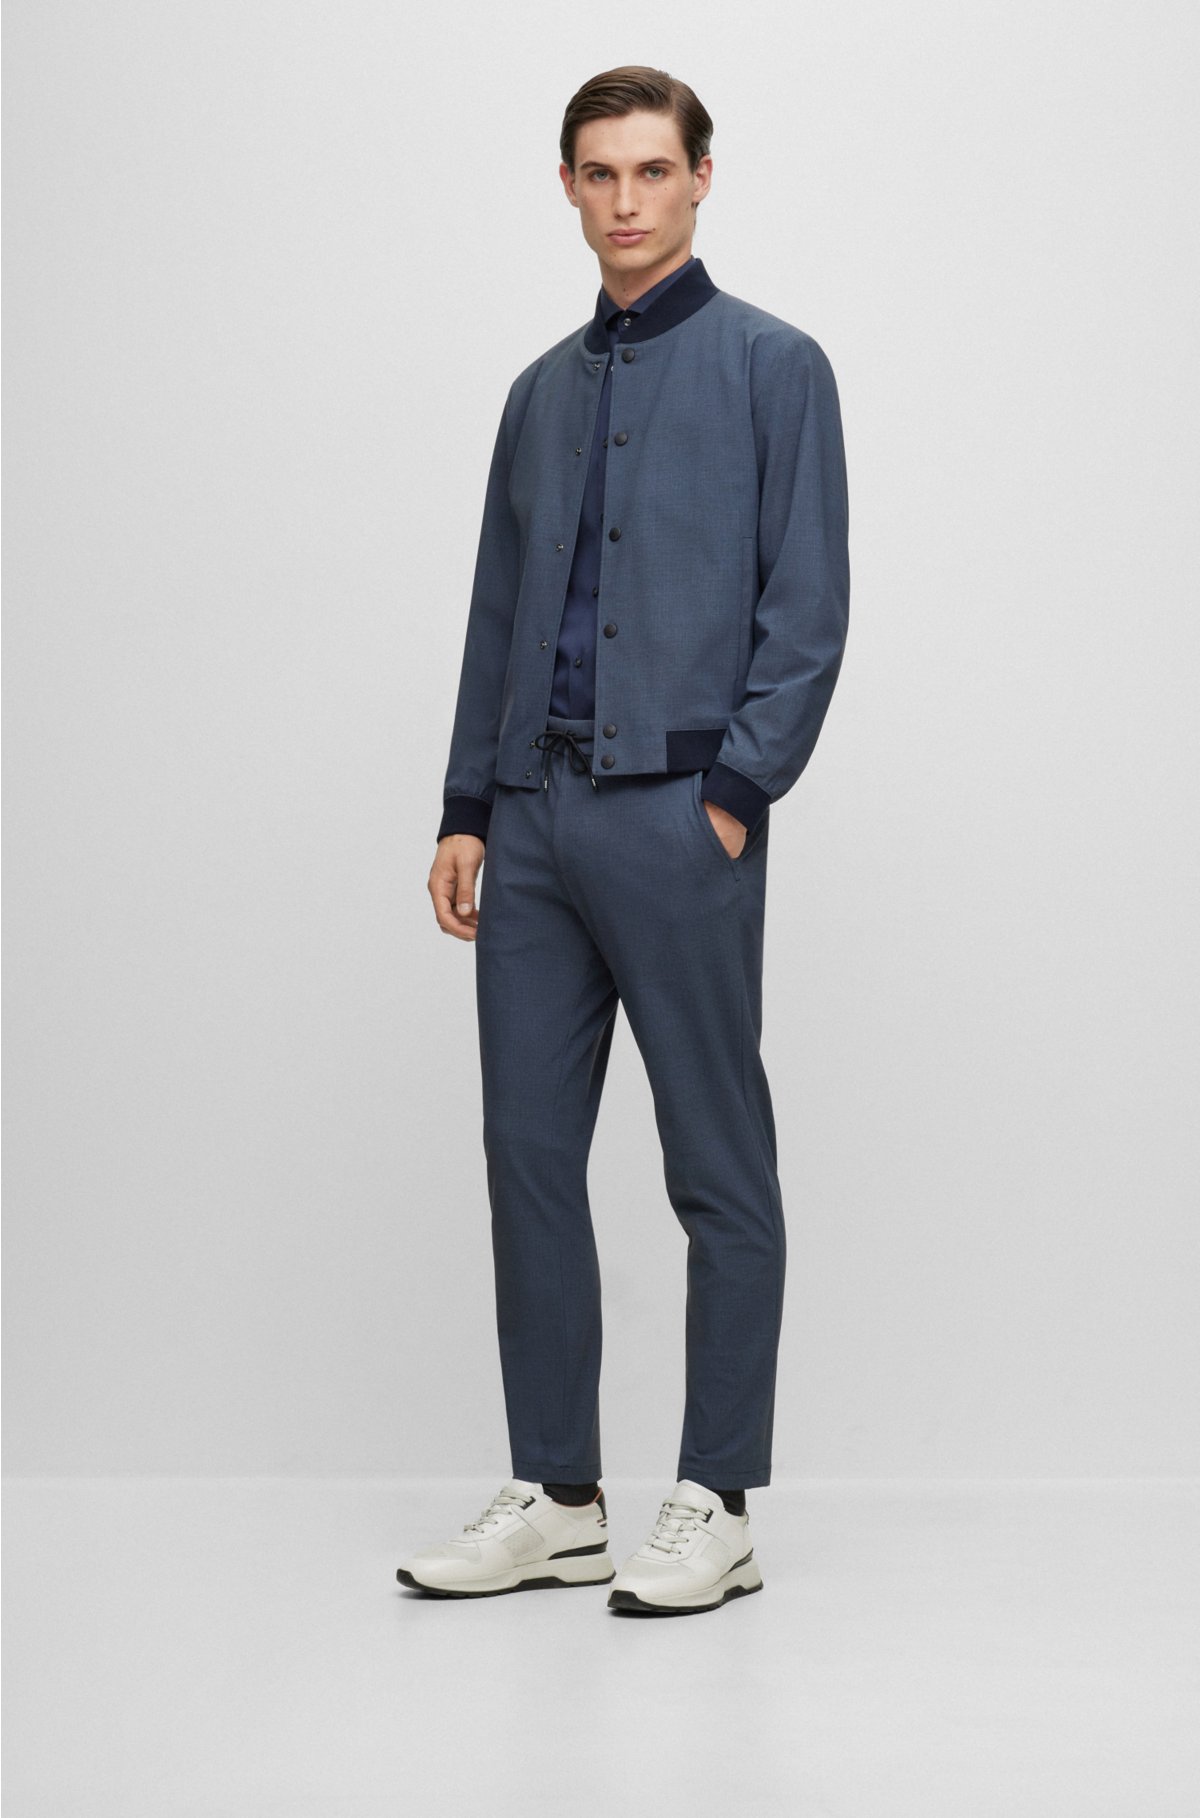 Slim-fit jacket in micro-patterned performance-stretch jersey, Dark Blue